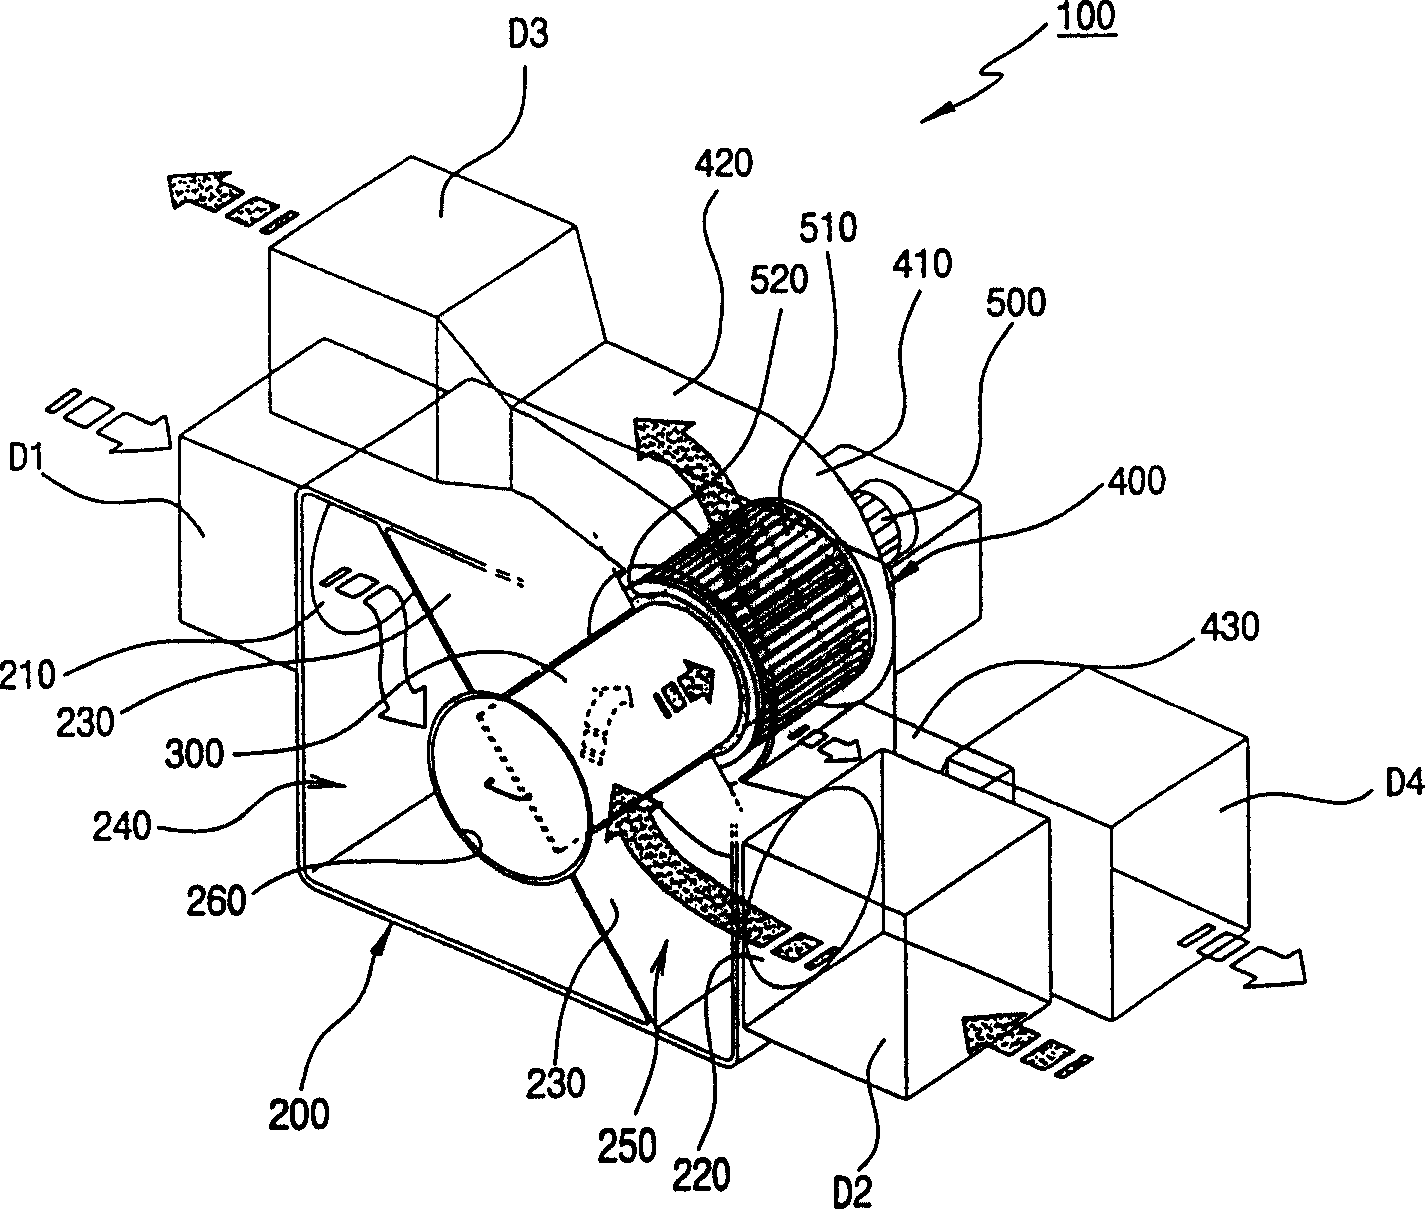 Single ventilation device with heat exhange function